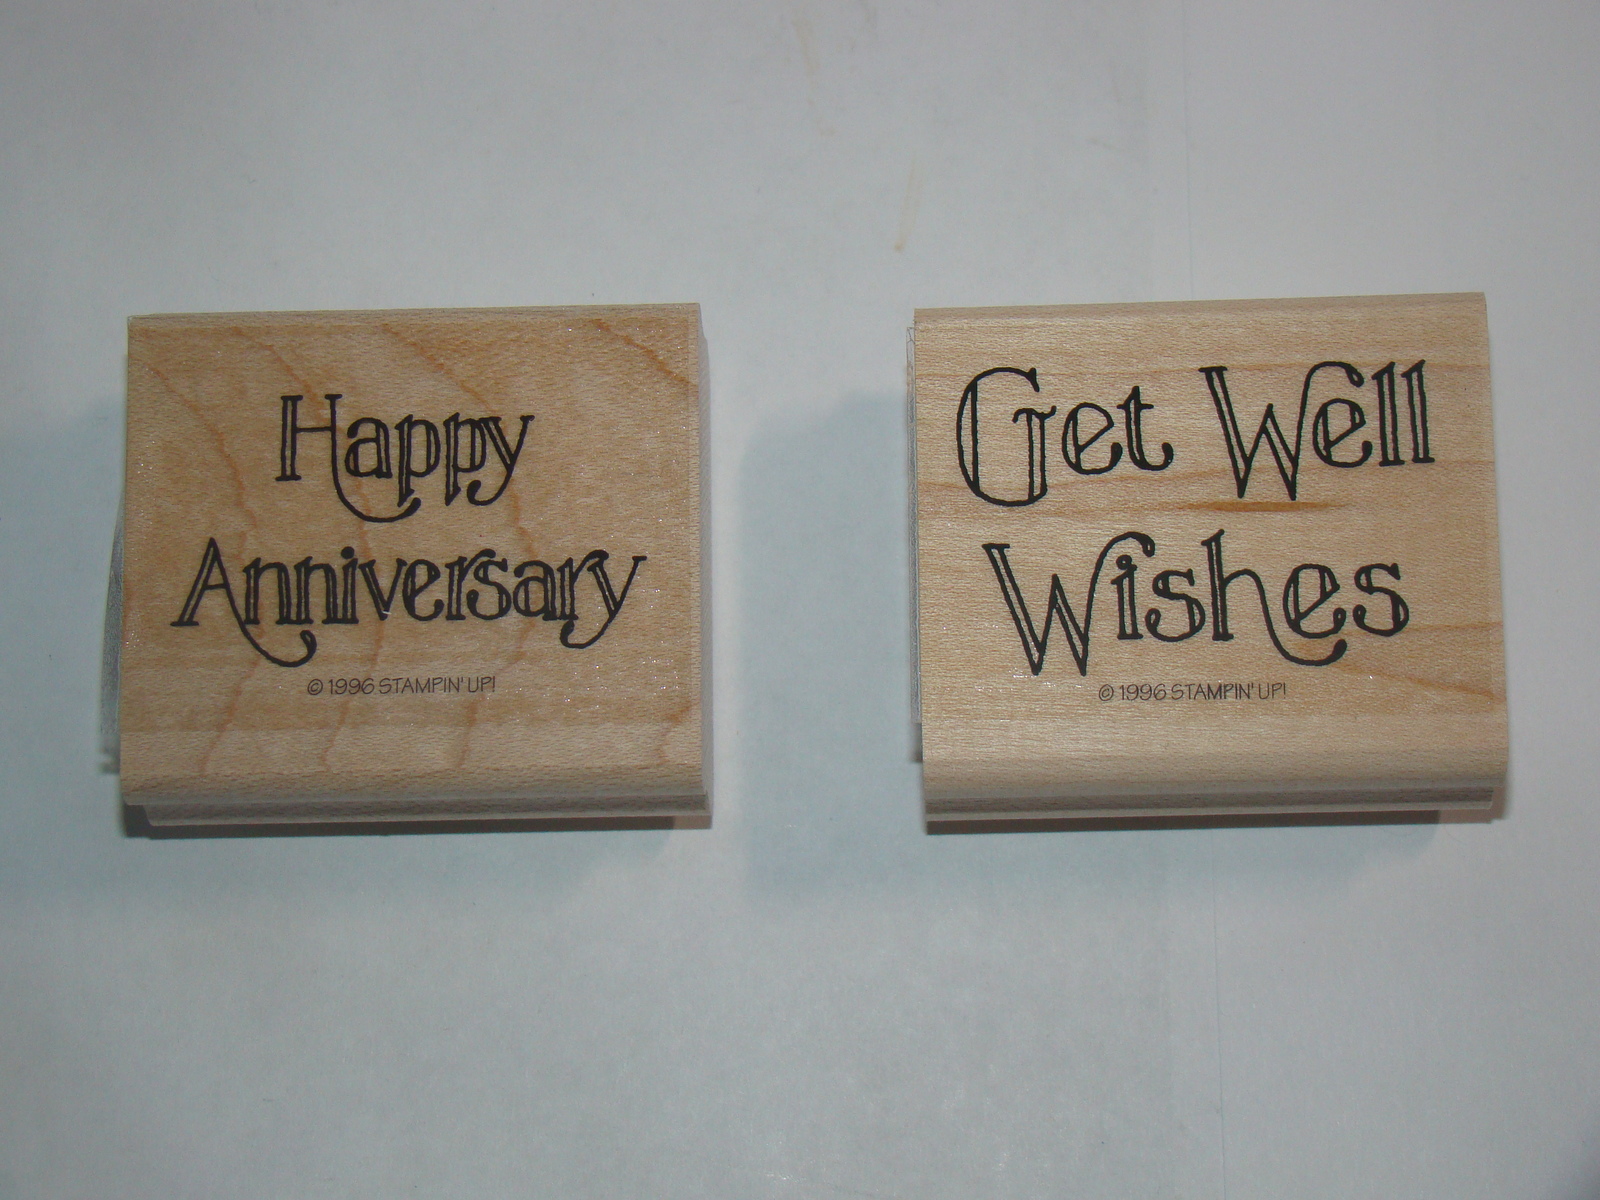 Primary image for Lot of (2) 1996 STAMPIN UP! Stamps -  Happy Anniversary & Get Well Wishes